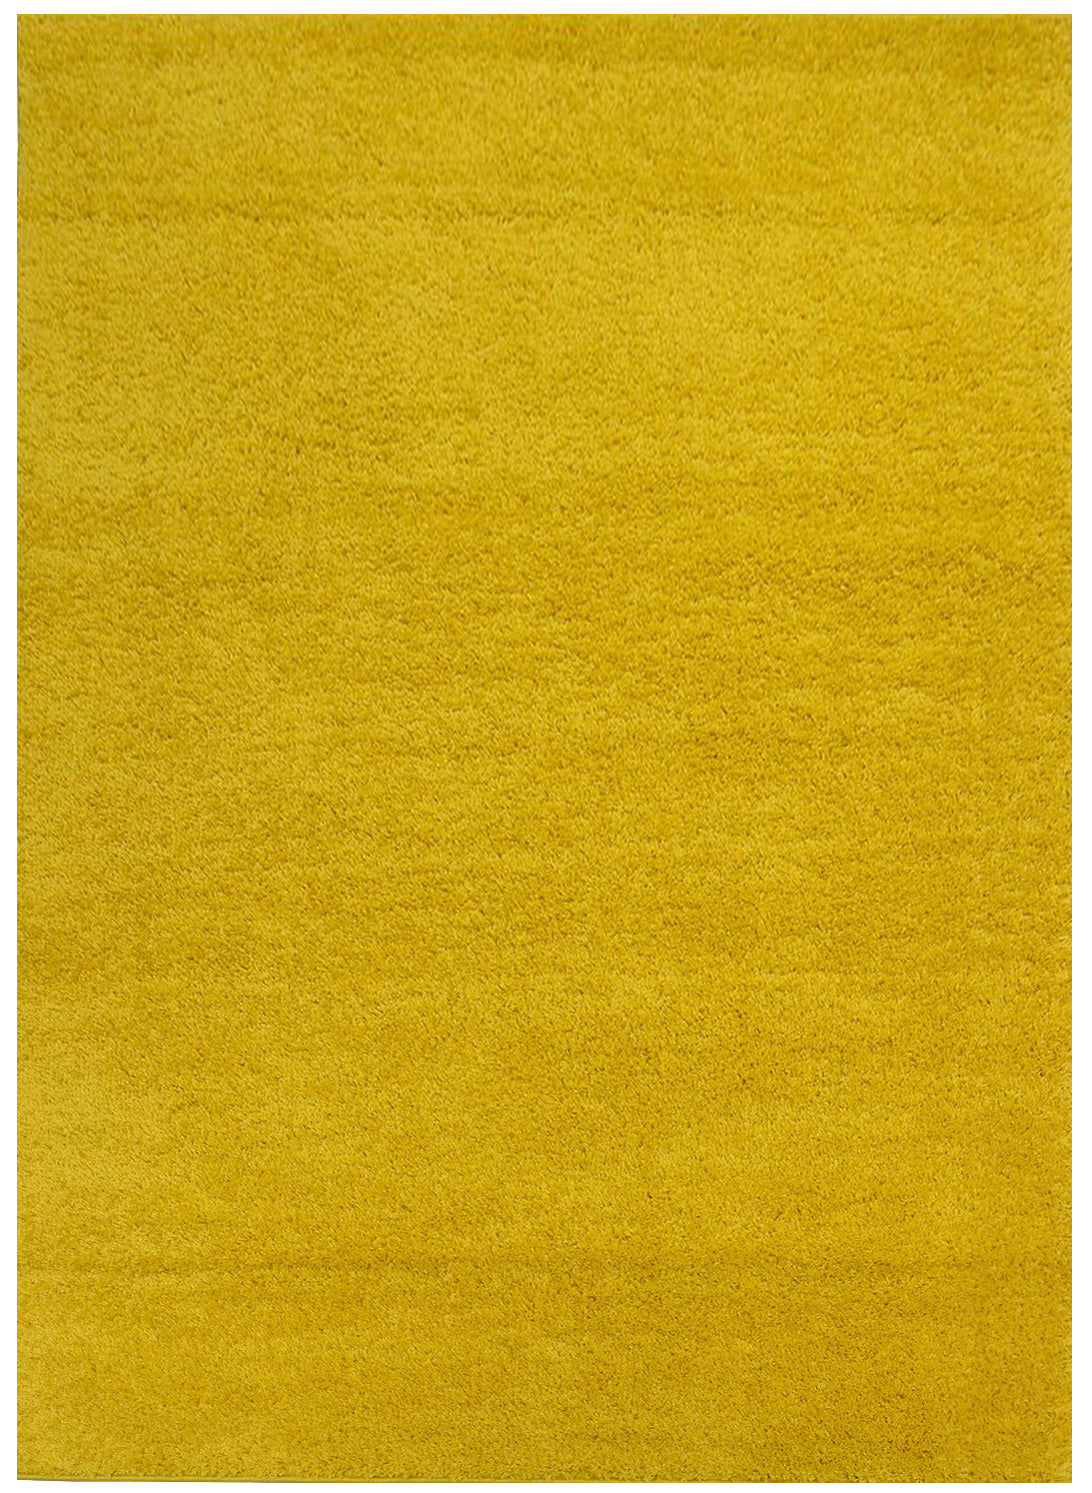 SOHO Shaggy Collection Solid Color Shag Area Rug (Yellow, 8 x 10)